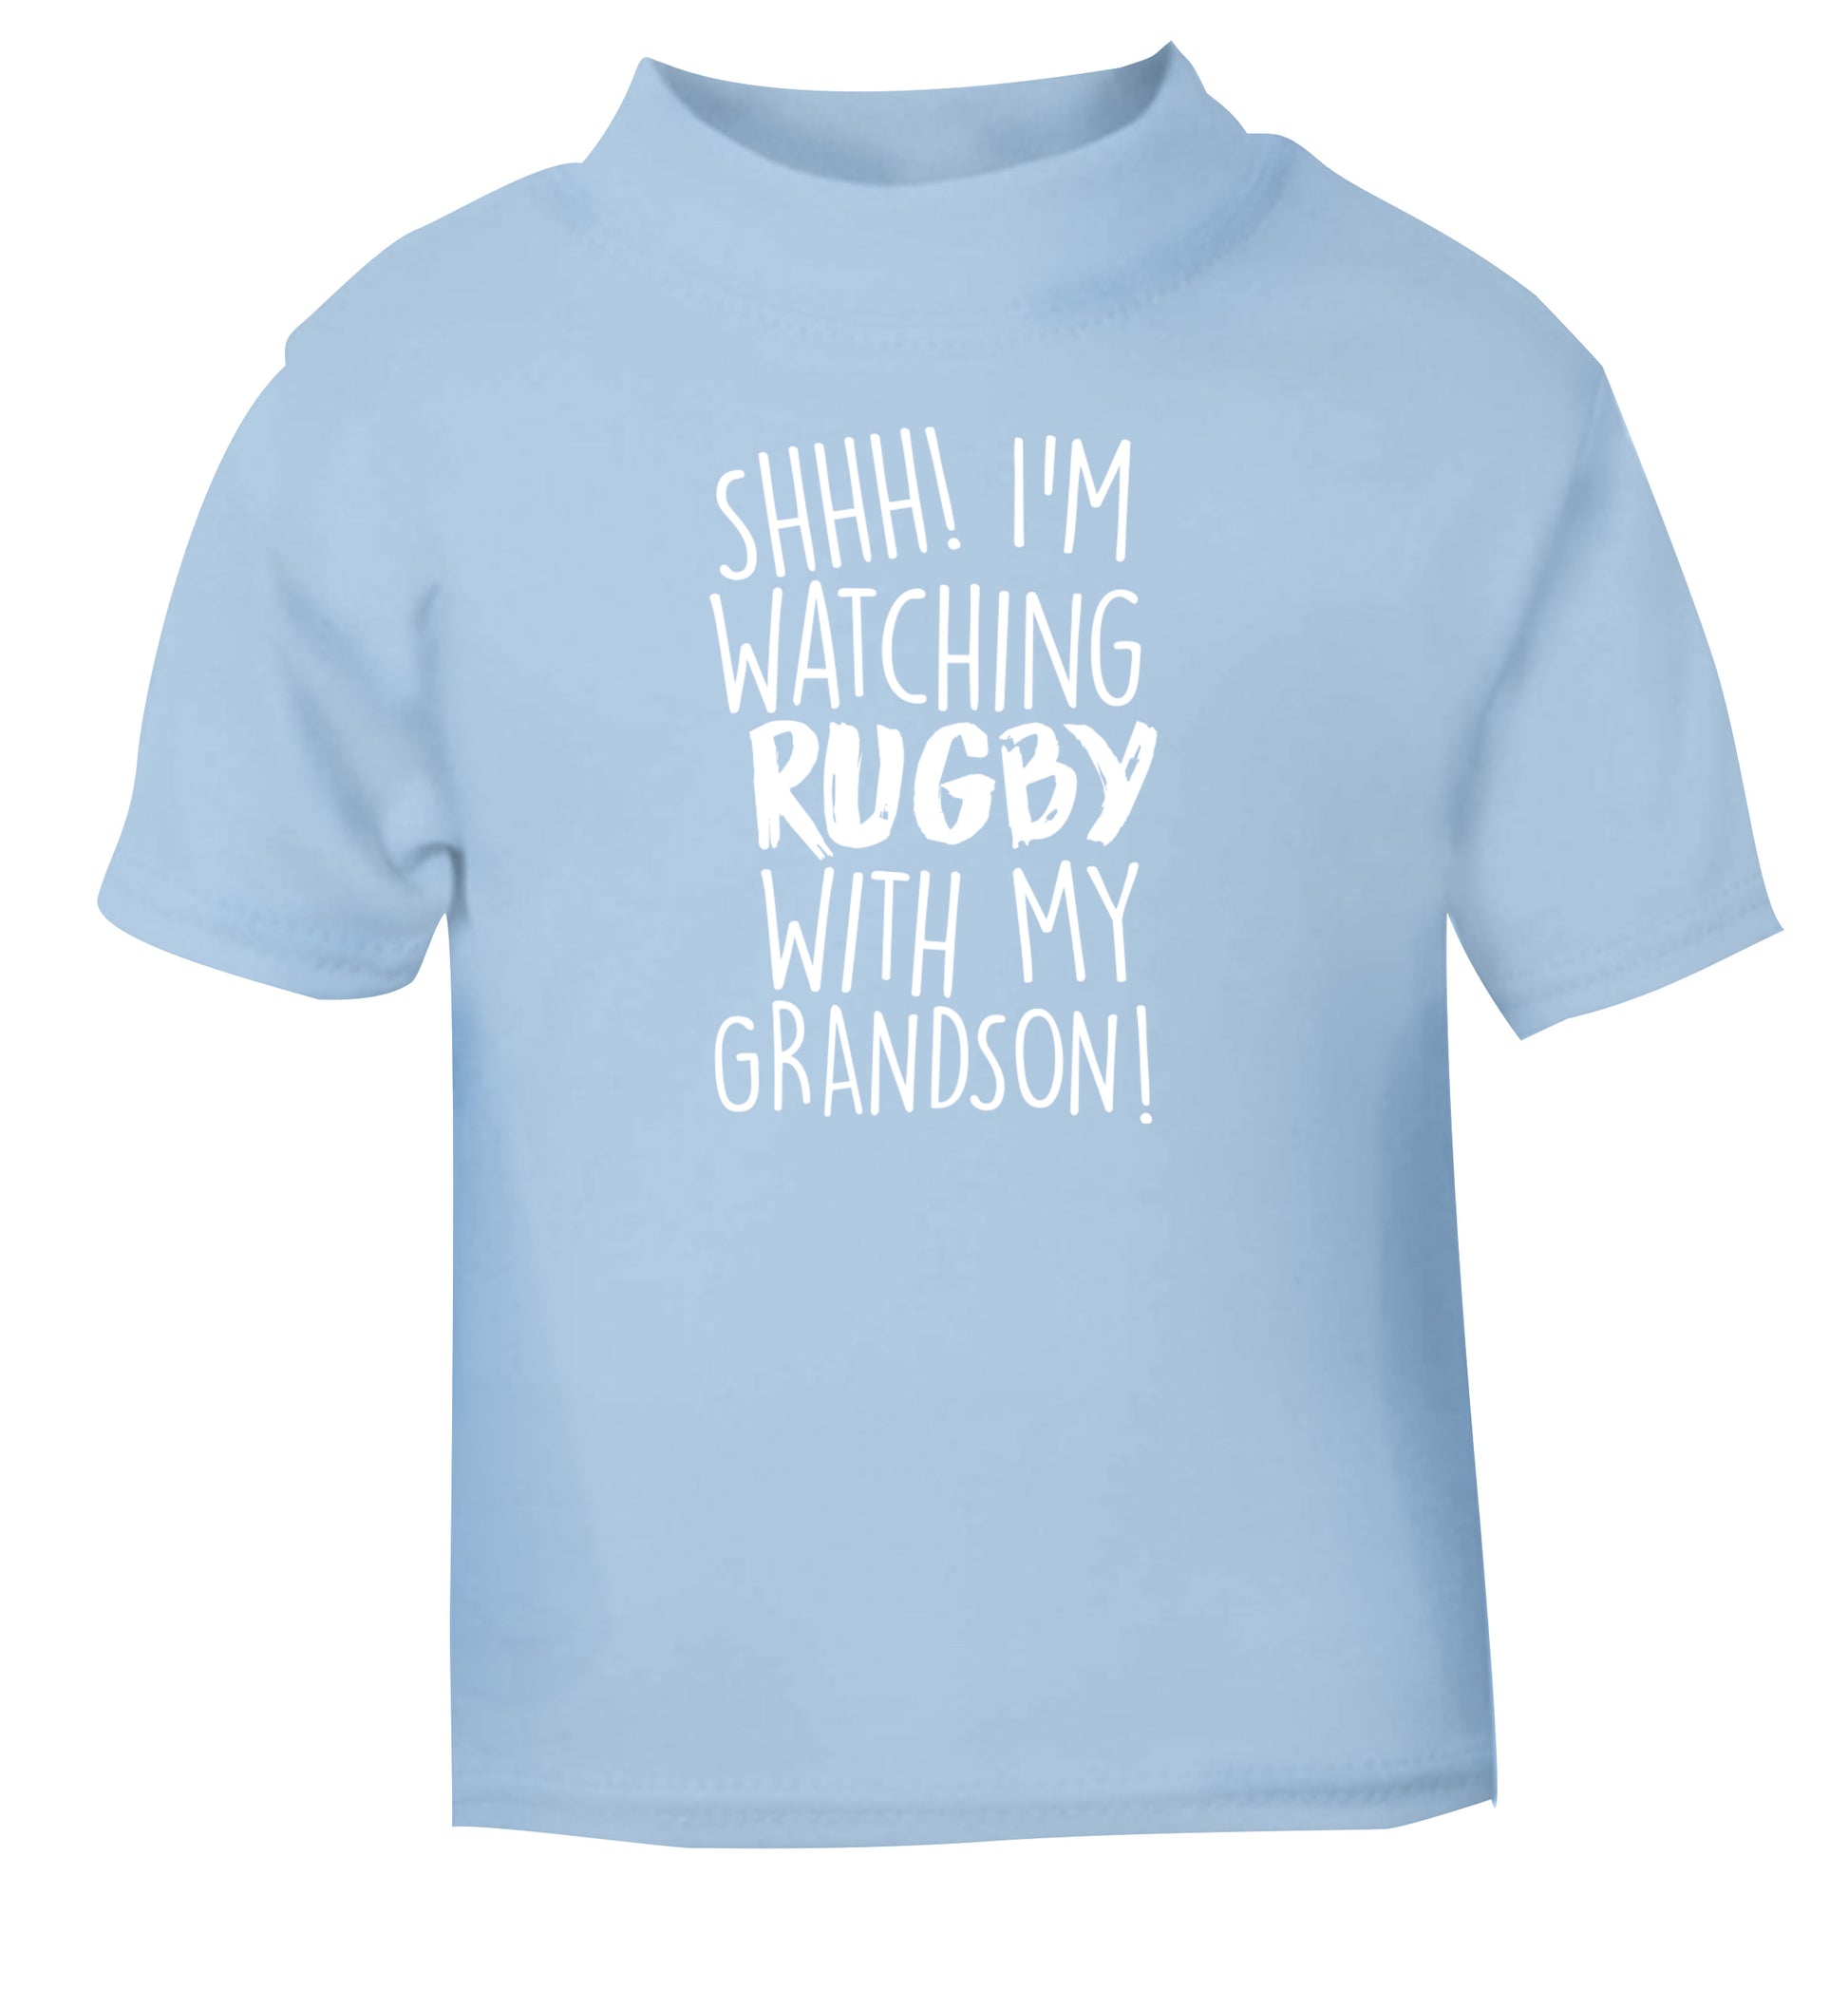 Shh I'm watching rugby with my grandson light blue Baby Toddler Tshirt 2 Years